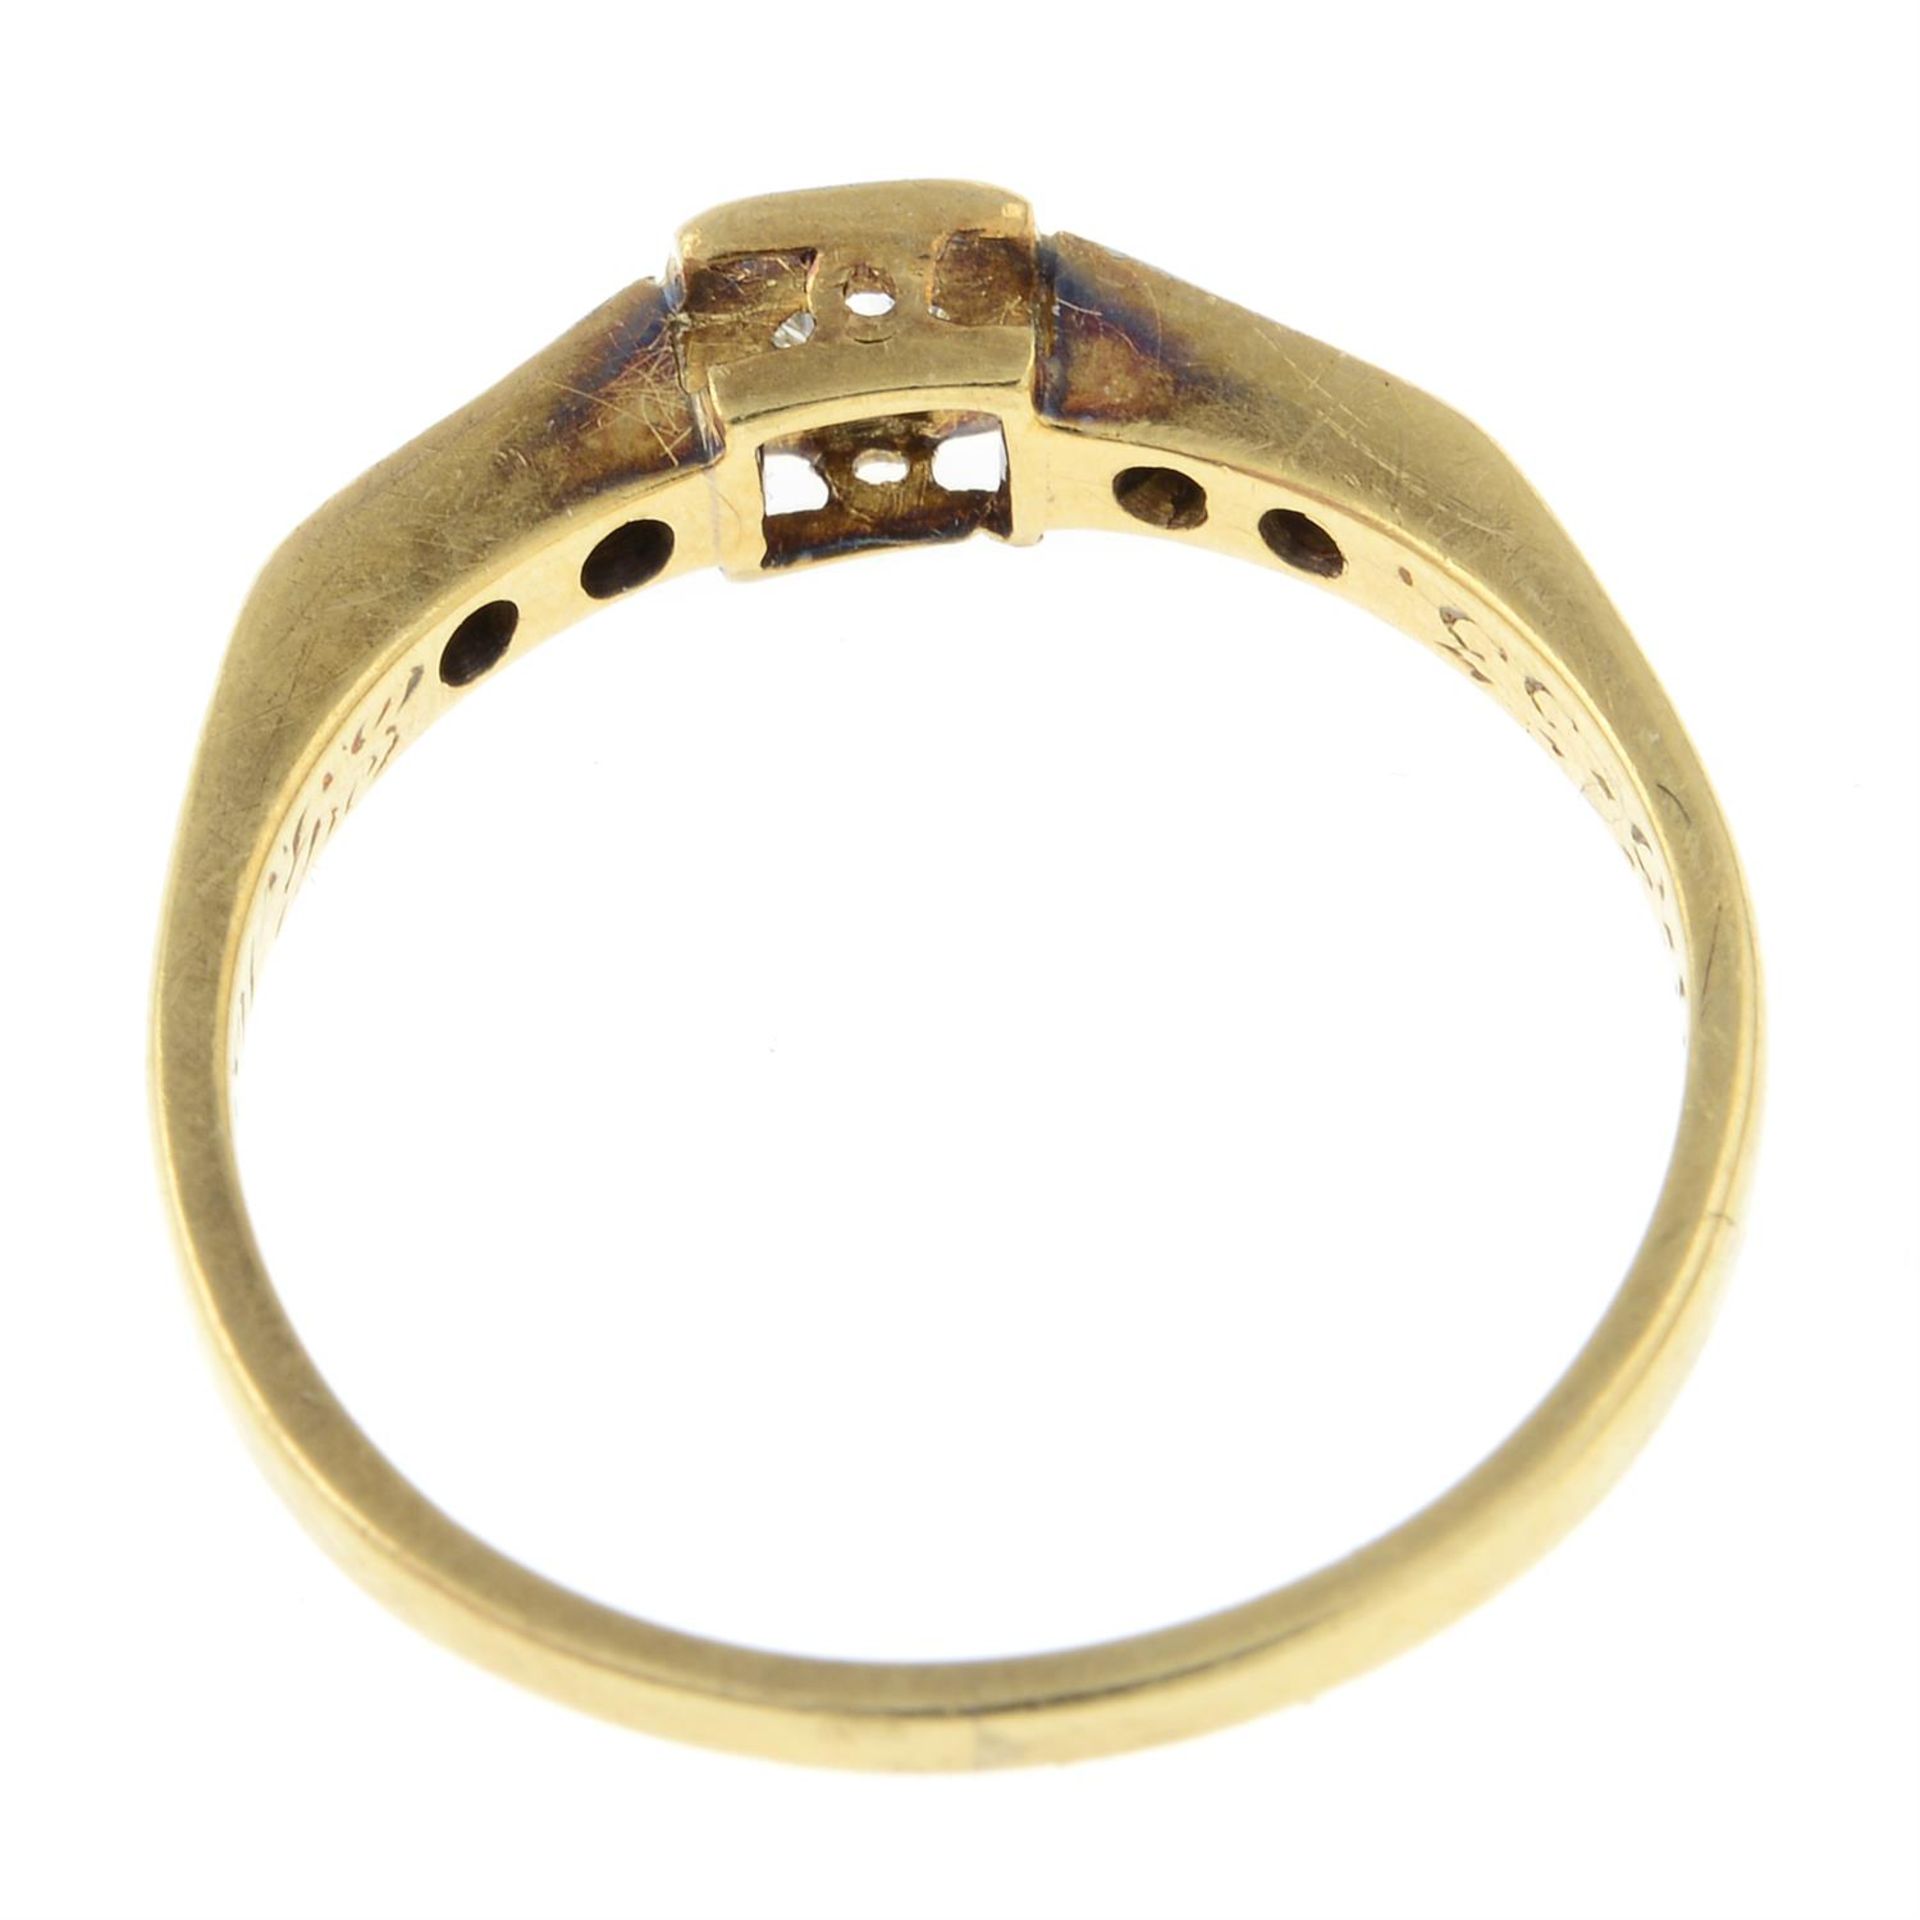 An early 20th century 18ct gold and platinum diamond ring. - Image 2 of 2